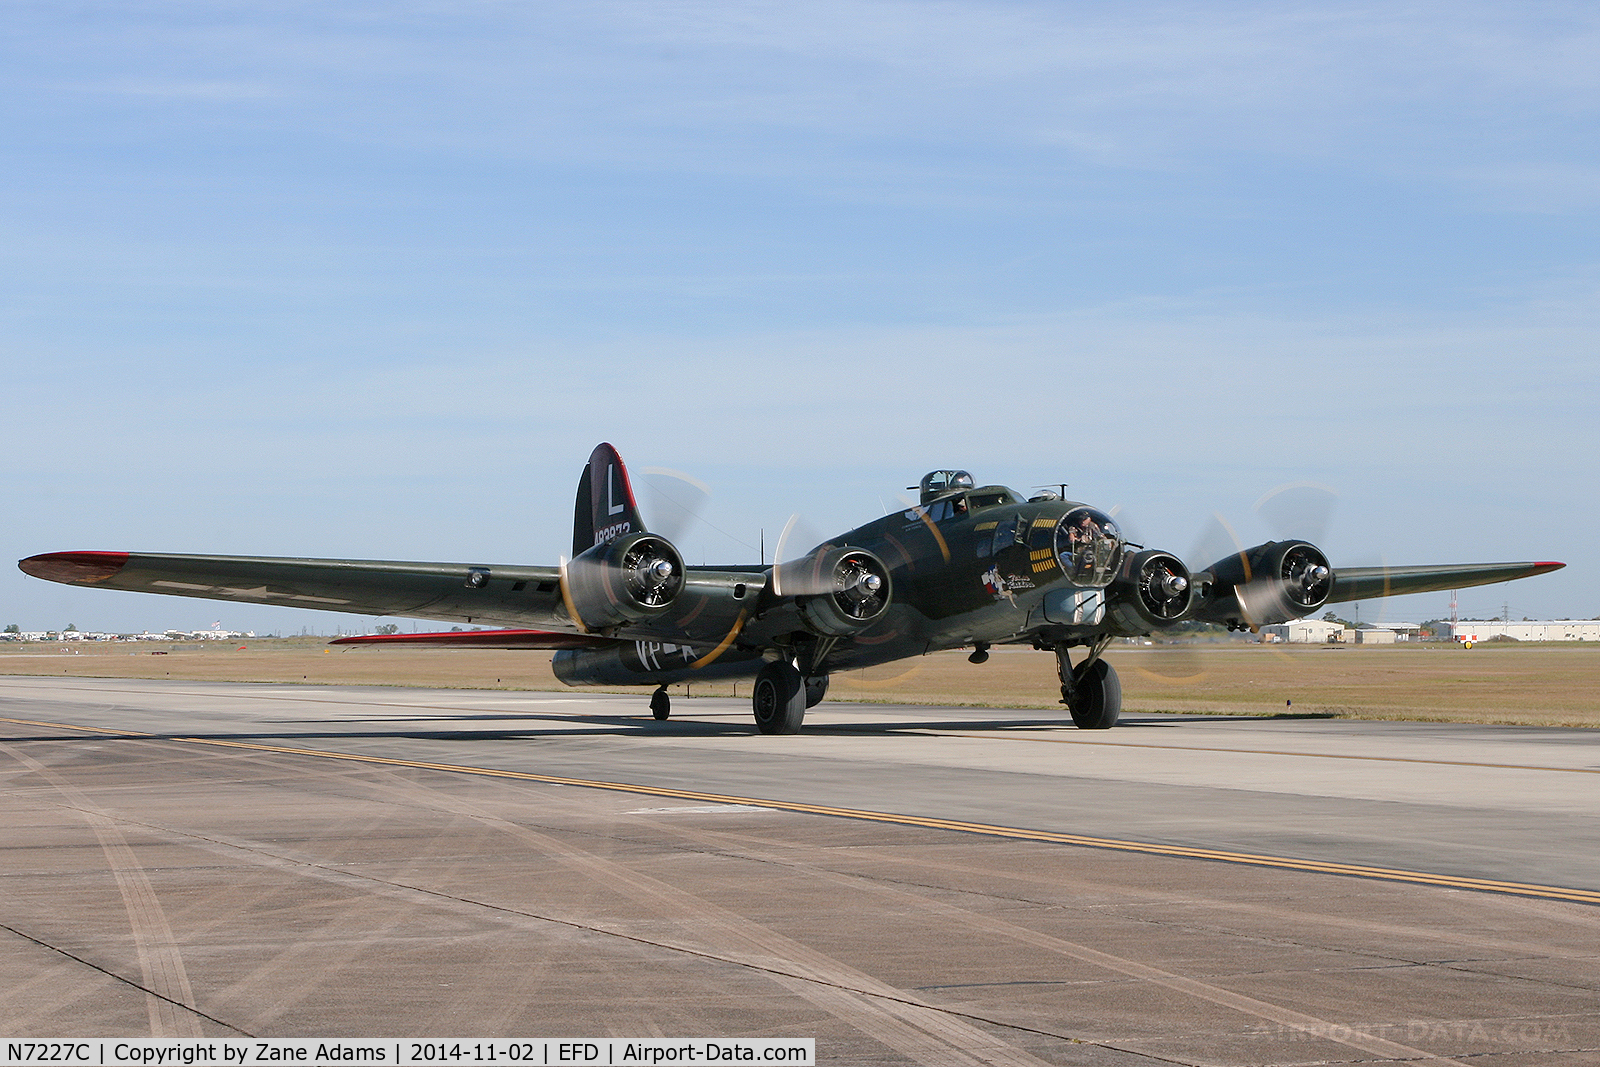 N7227C, 1944 Boeing B-17G Fortress C/N 32513, At the 2014 Wings Over Houston Airshow